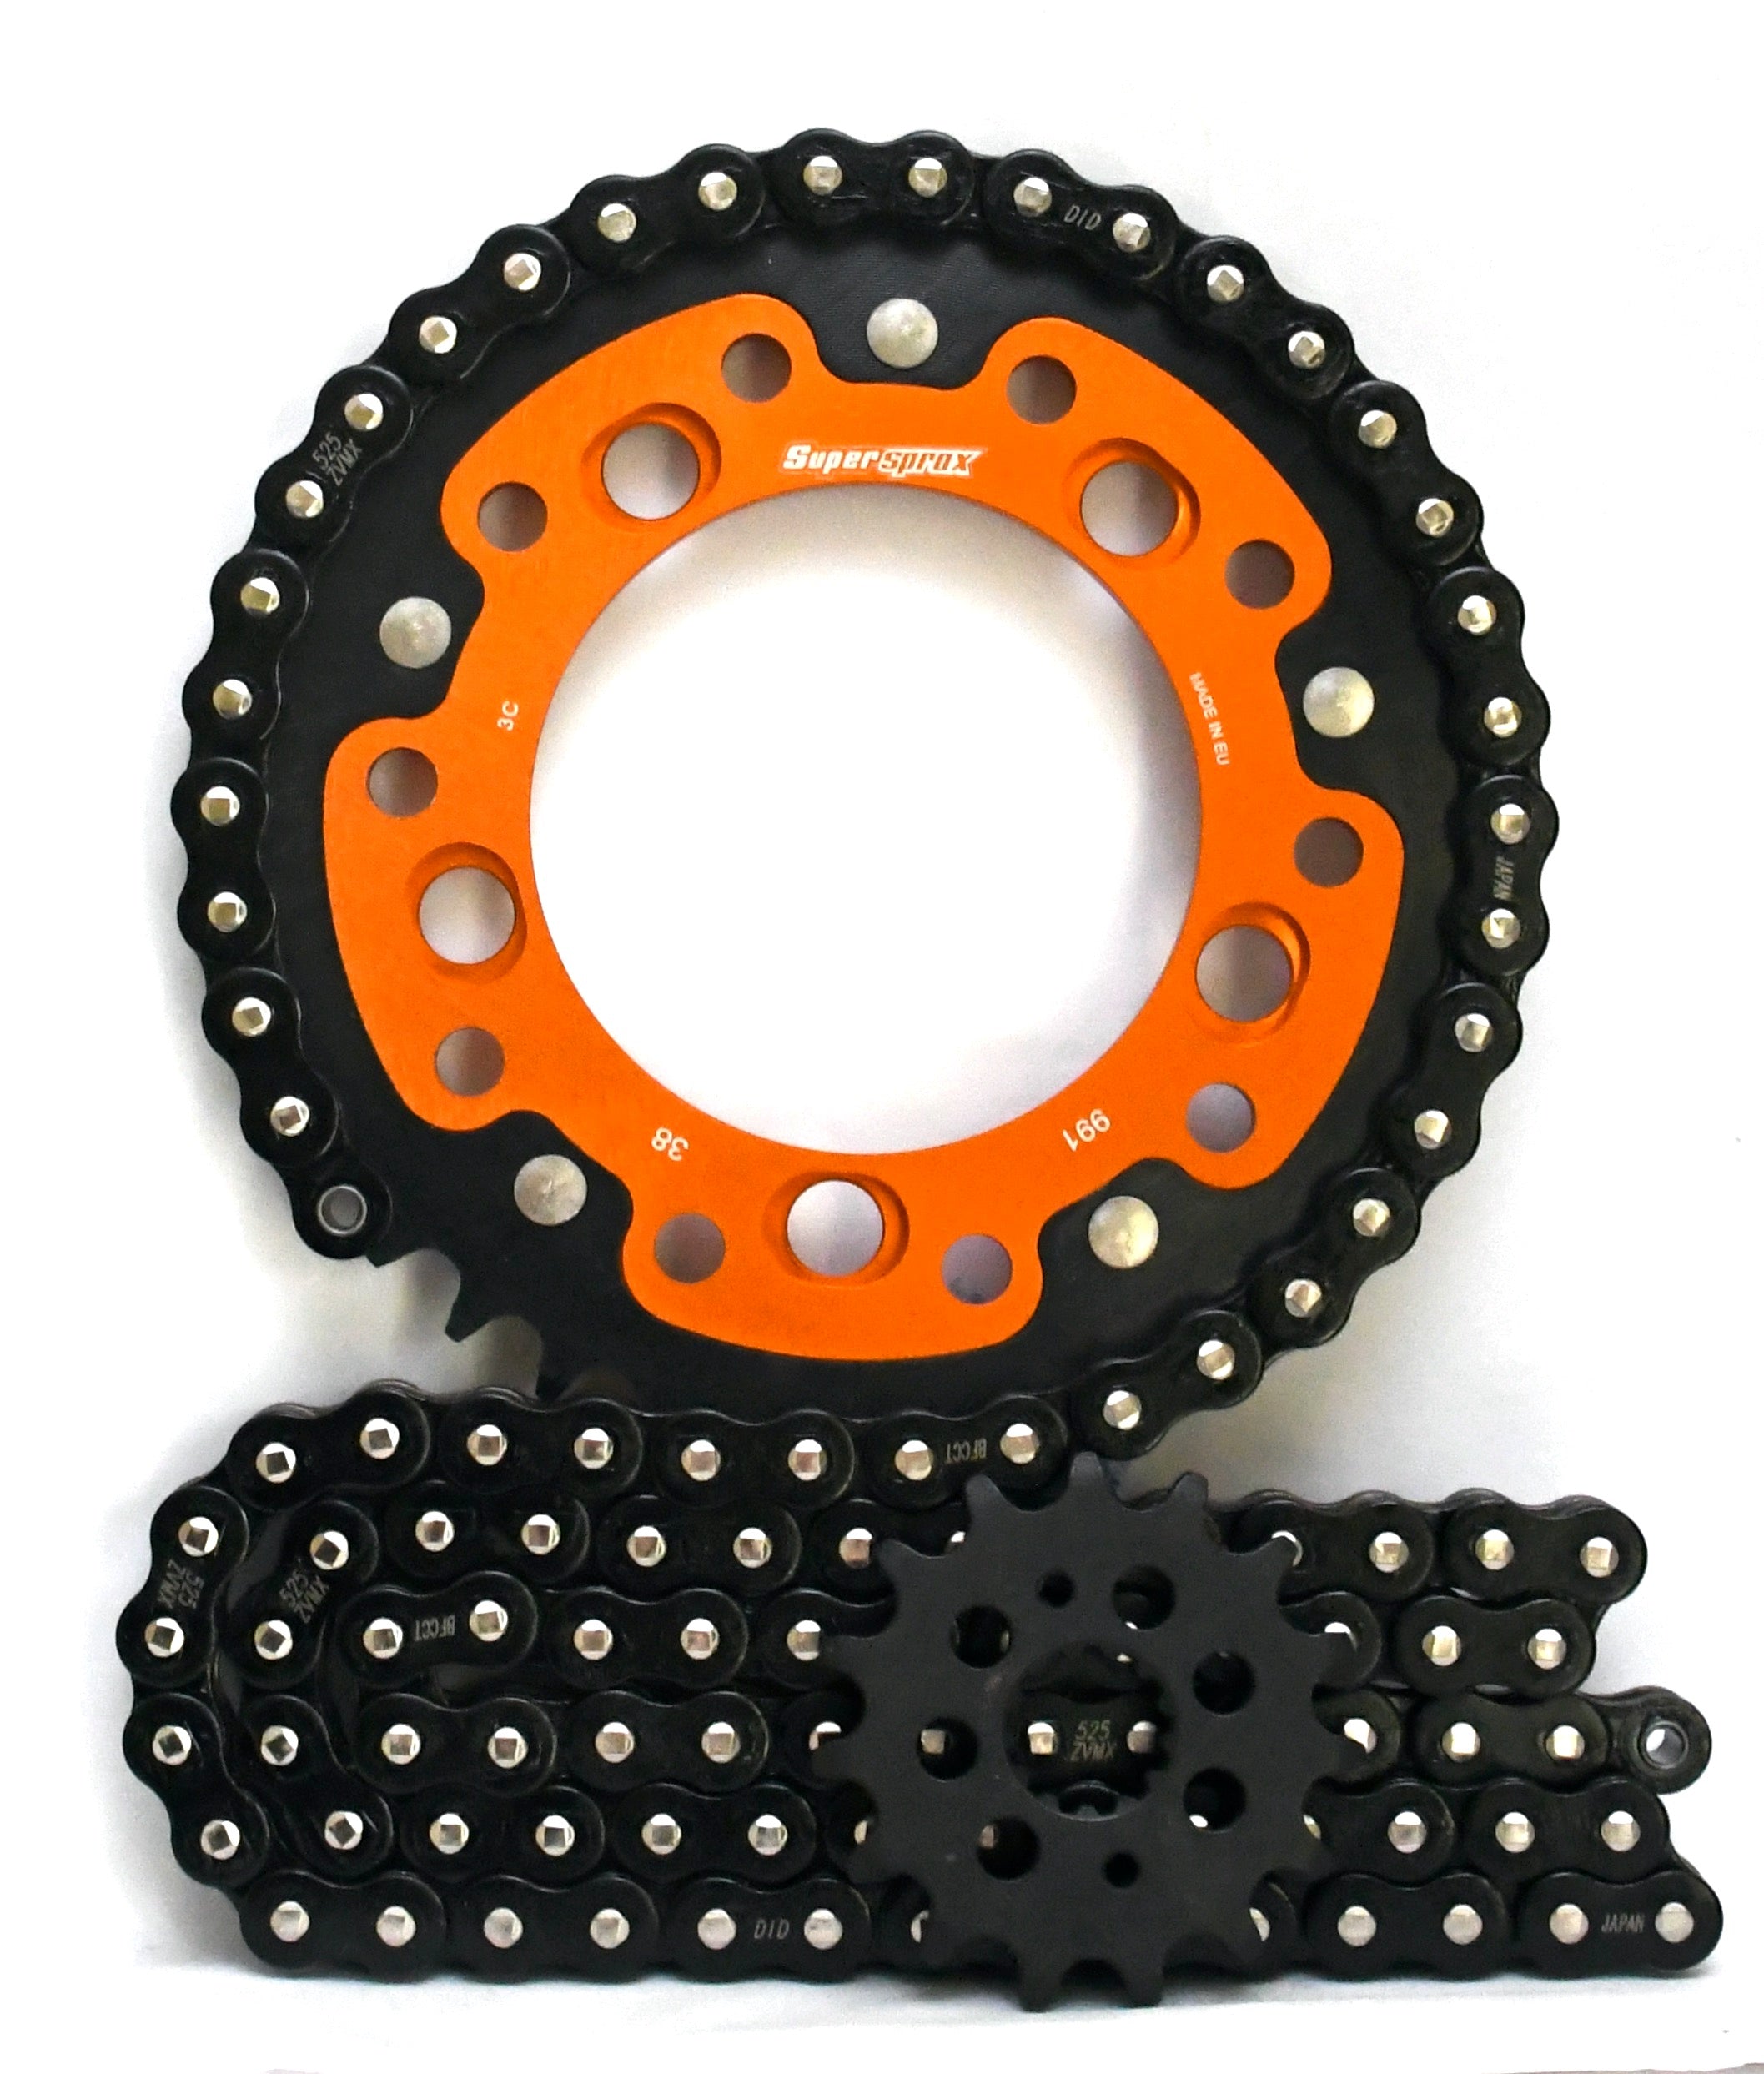 Supersprox Chain & Sprocket Kit for KTM 990 Superduke 05-13 (Inc R) - Choose Your Gearing